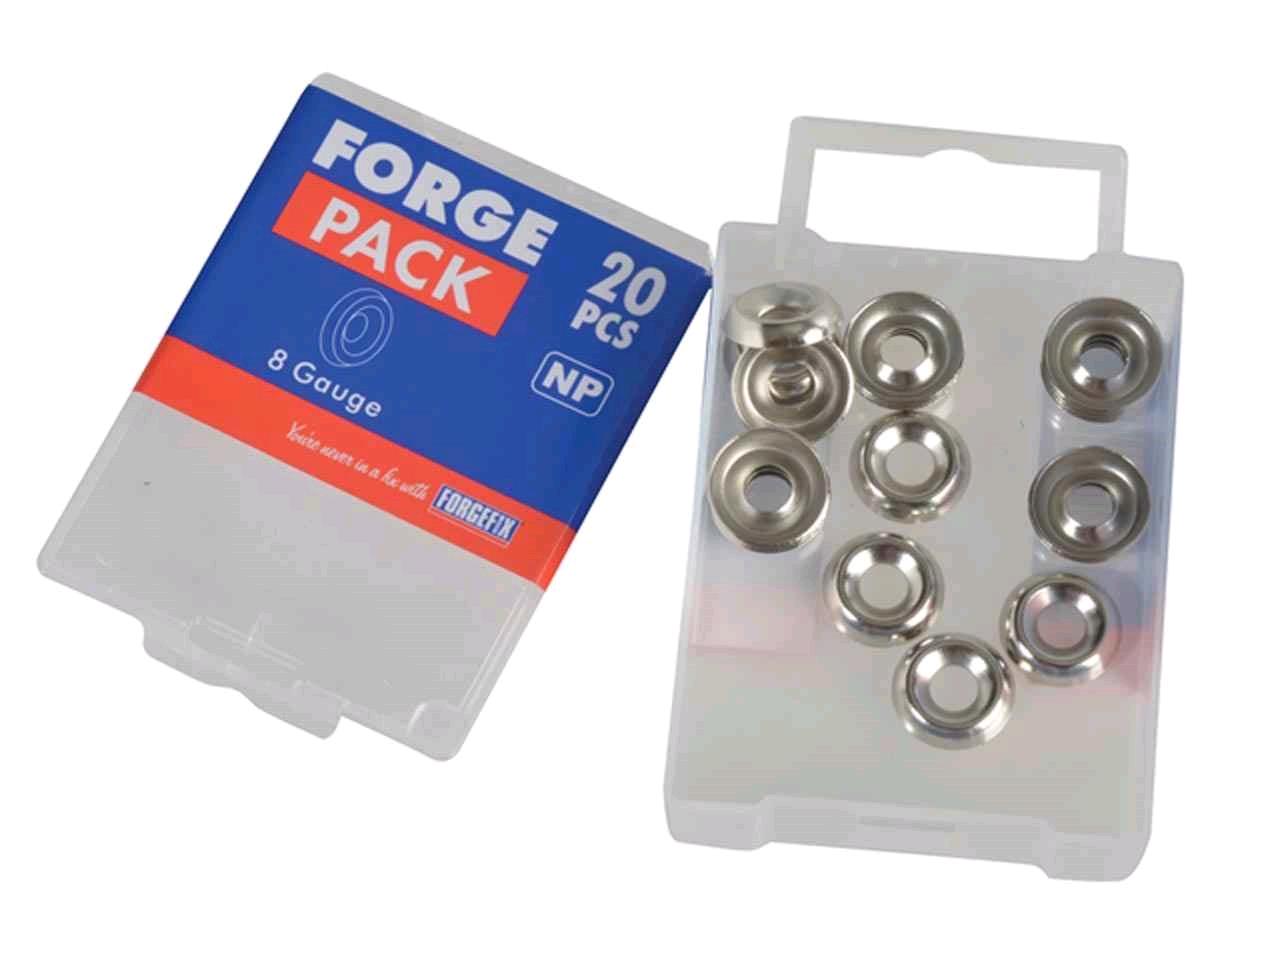 Forgefix Screw Cup Washers No 8's Brass Nickel Plated (Pack of 20) 